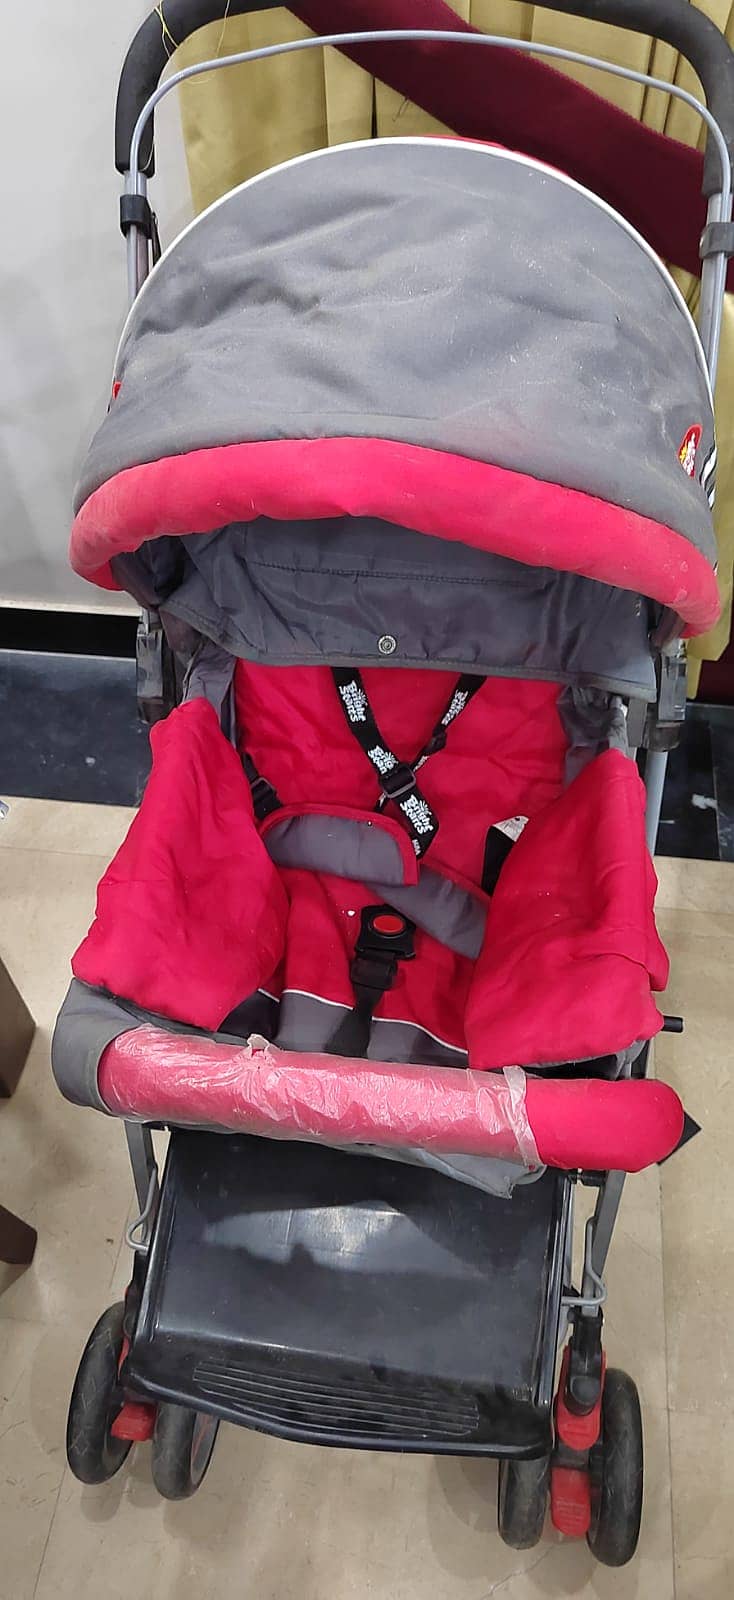 Baby Stroller in Brand New Condition 0